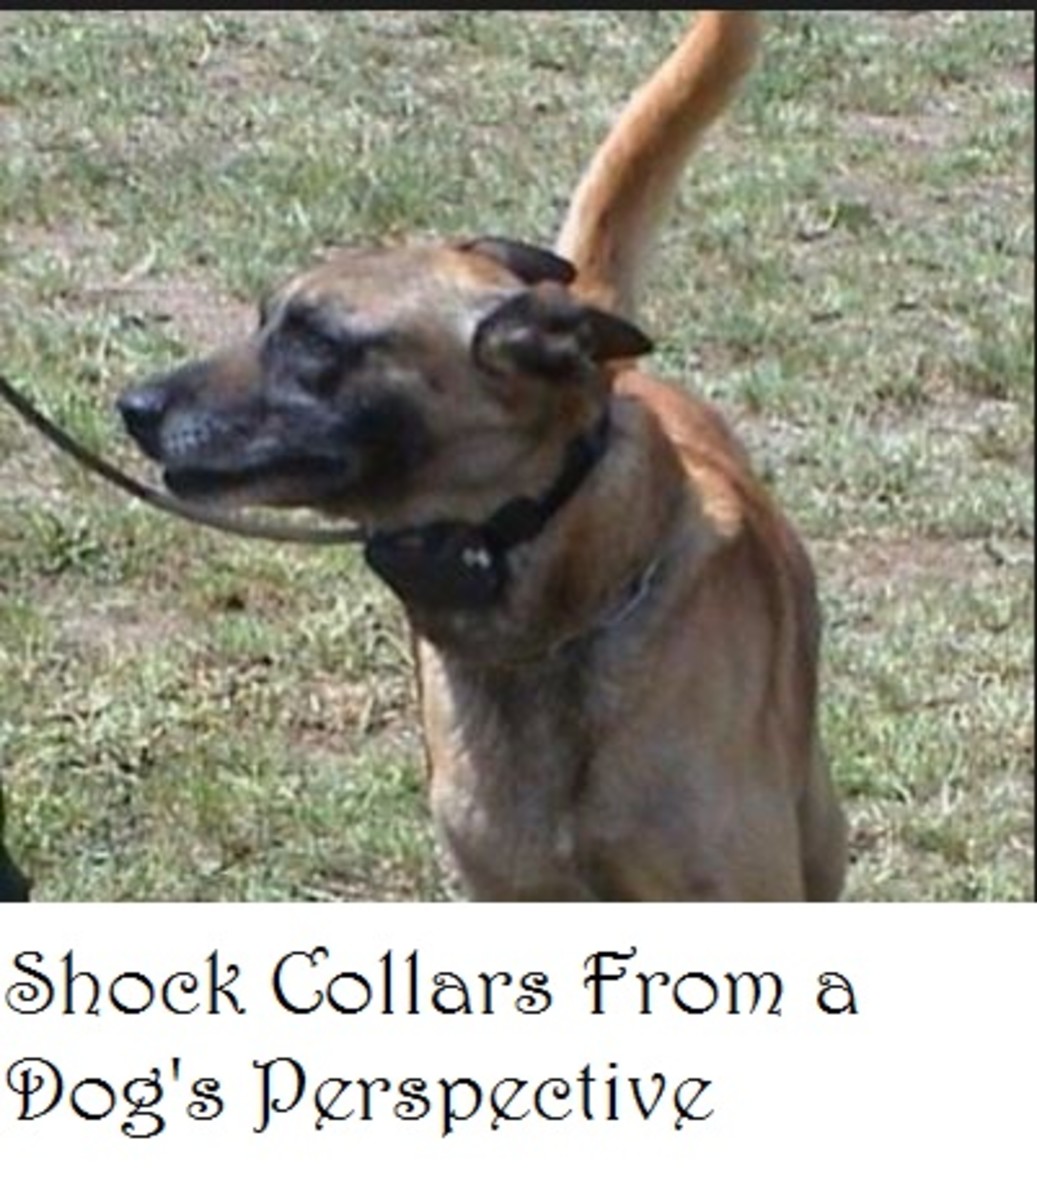 A Dog's Perspective on Shock Collars Speaks Volumes, are We Listening?